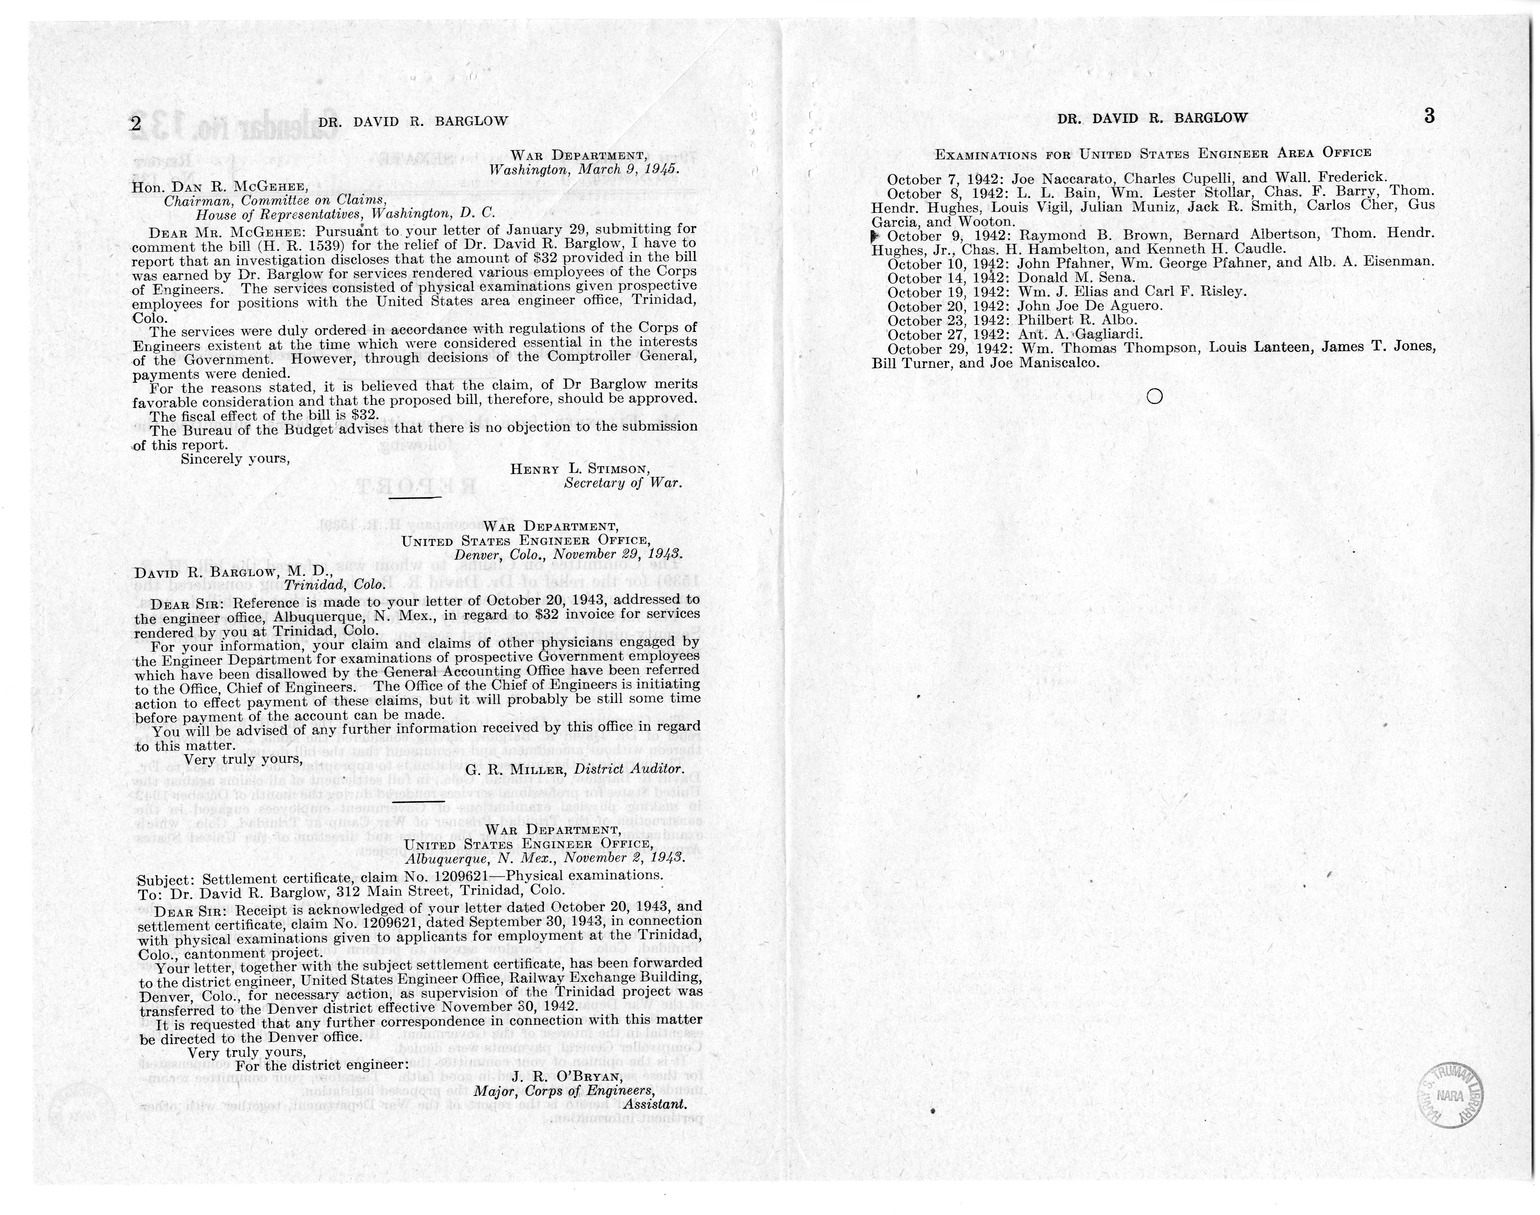 Memorandum from Frederick J. Bailey to M. C. Latta, H.R. 1539, For the Relief of Dr. David J. Barglow, with Attachments